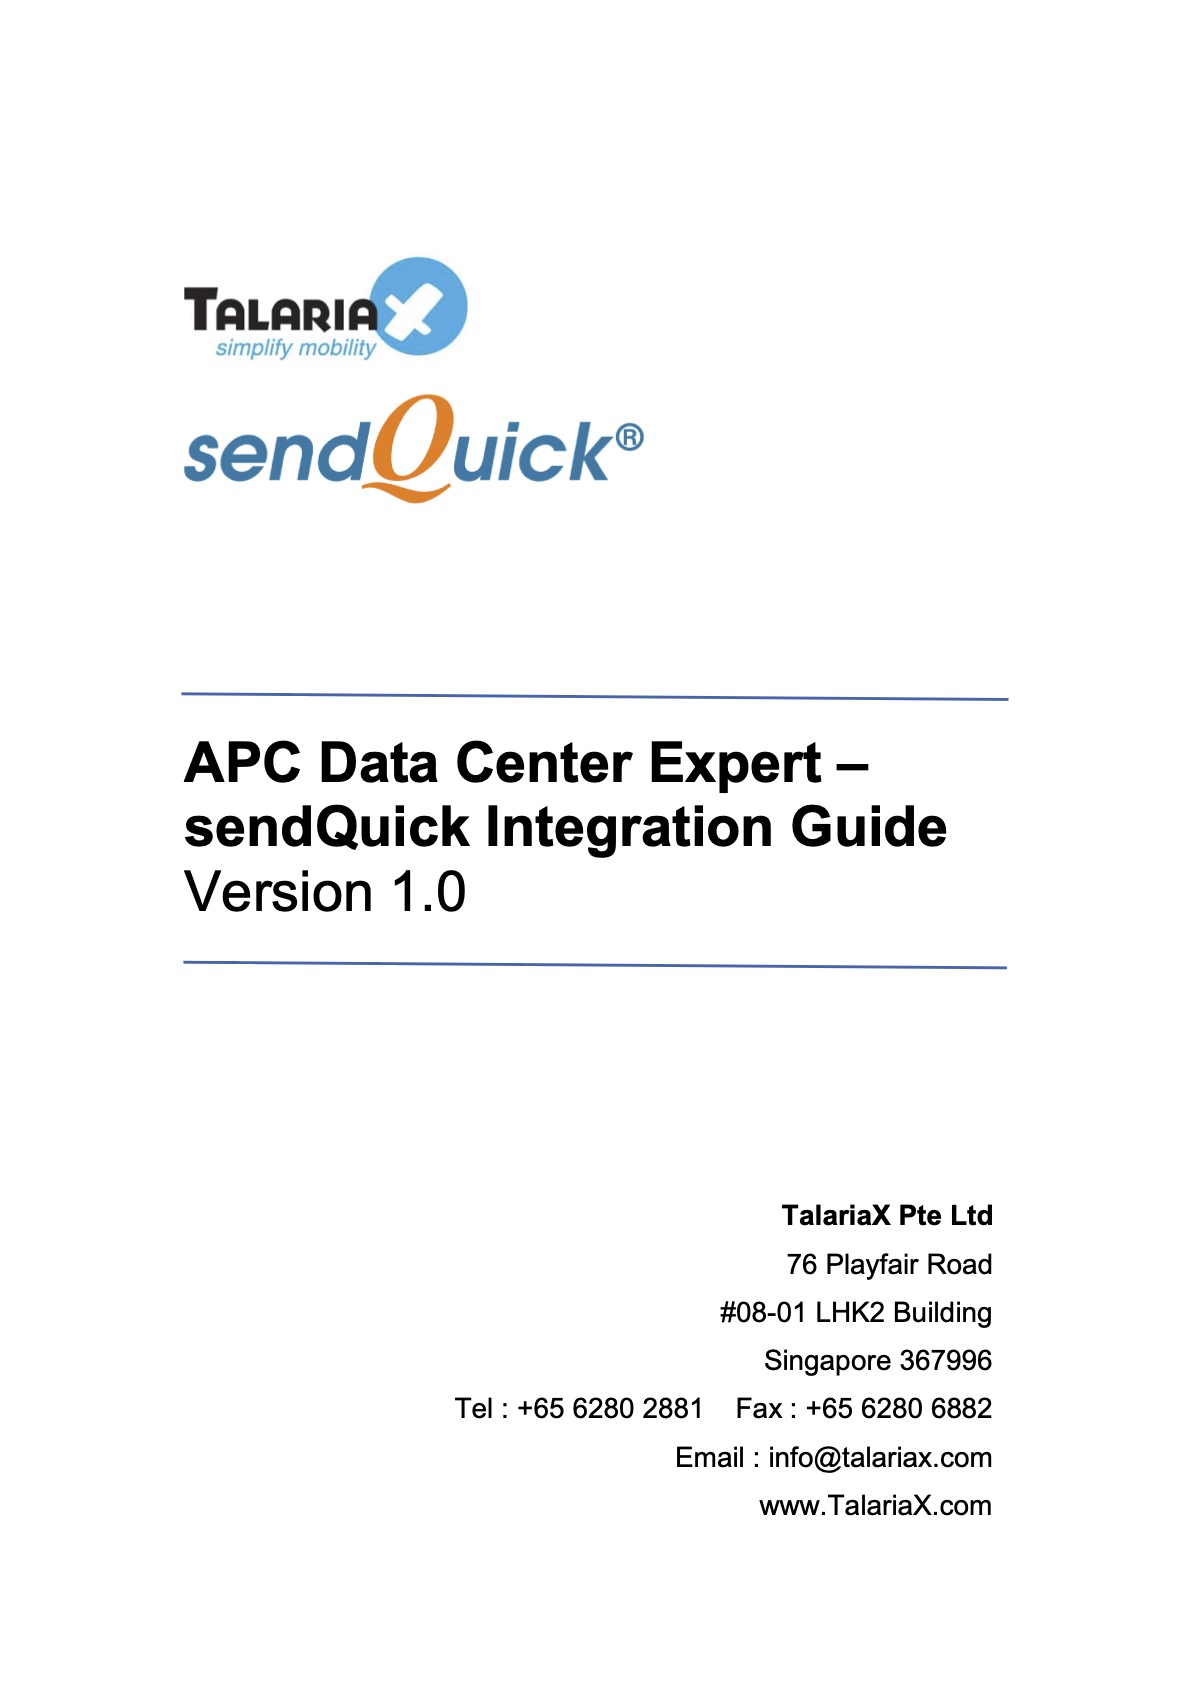 You are currently viewing APC Data Center Expert and sendQuick Integration Guide V1.0